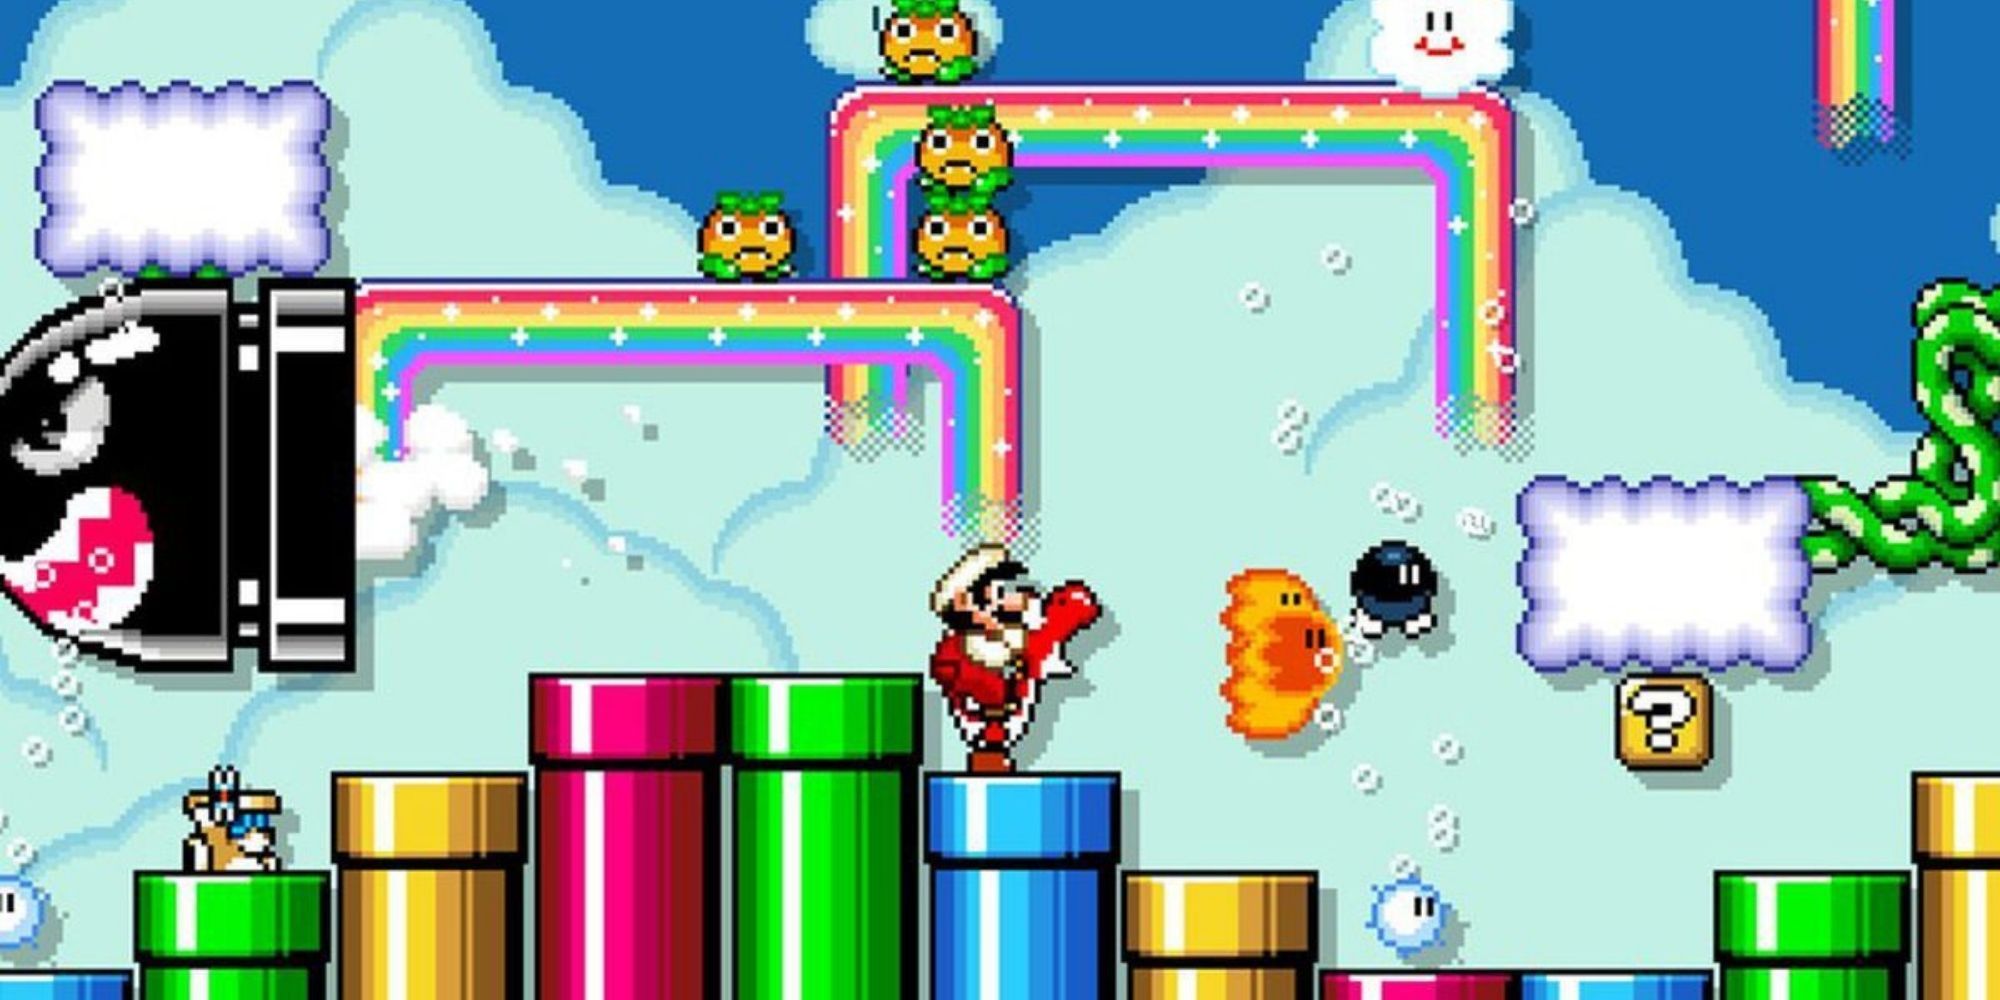 Mario and Yoshi stand on pipes in the sky In Super Mario Maker 2